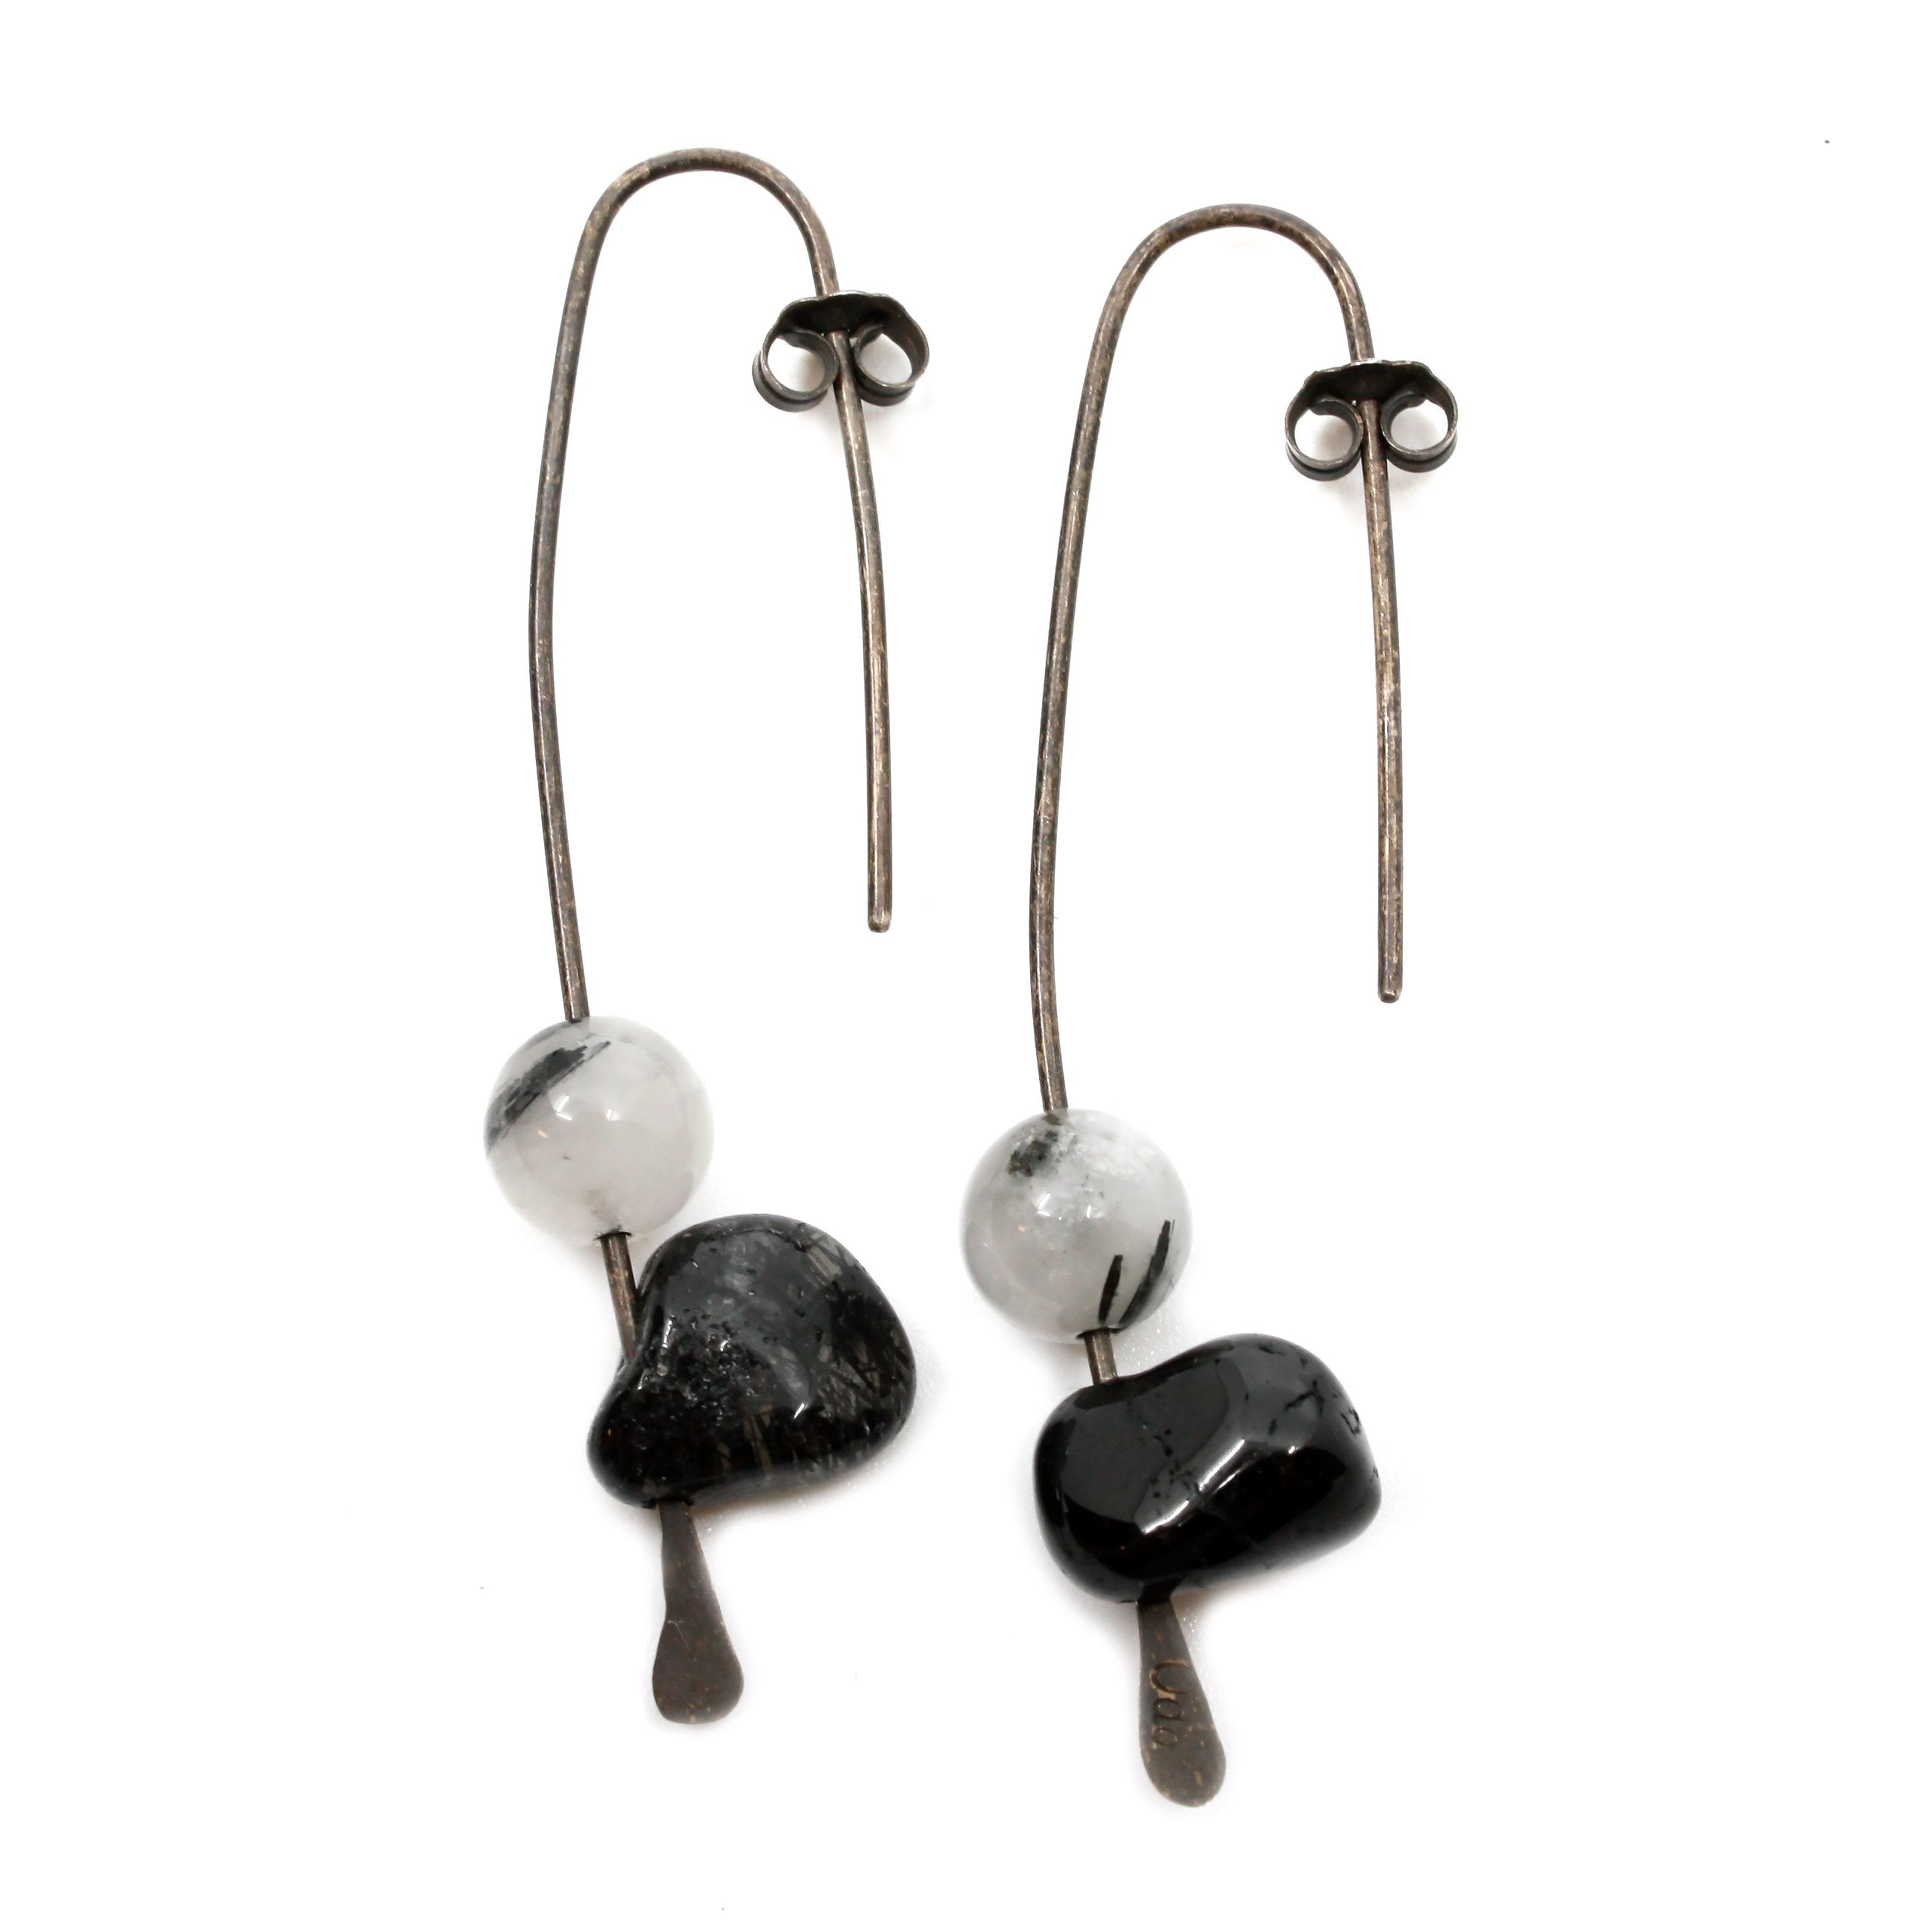 Oxidised Silver Earrings with Rutilated Quartz Earrings Mary Odorcic 